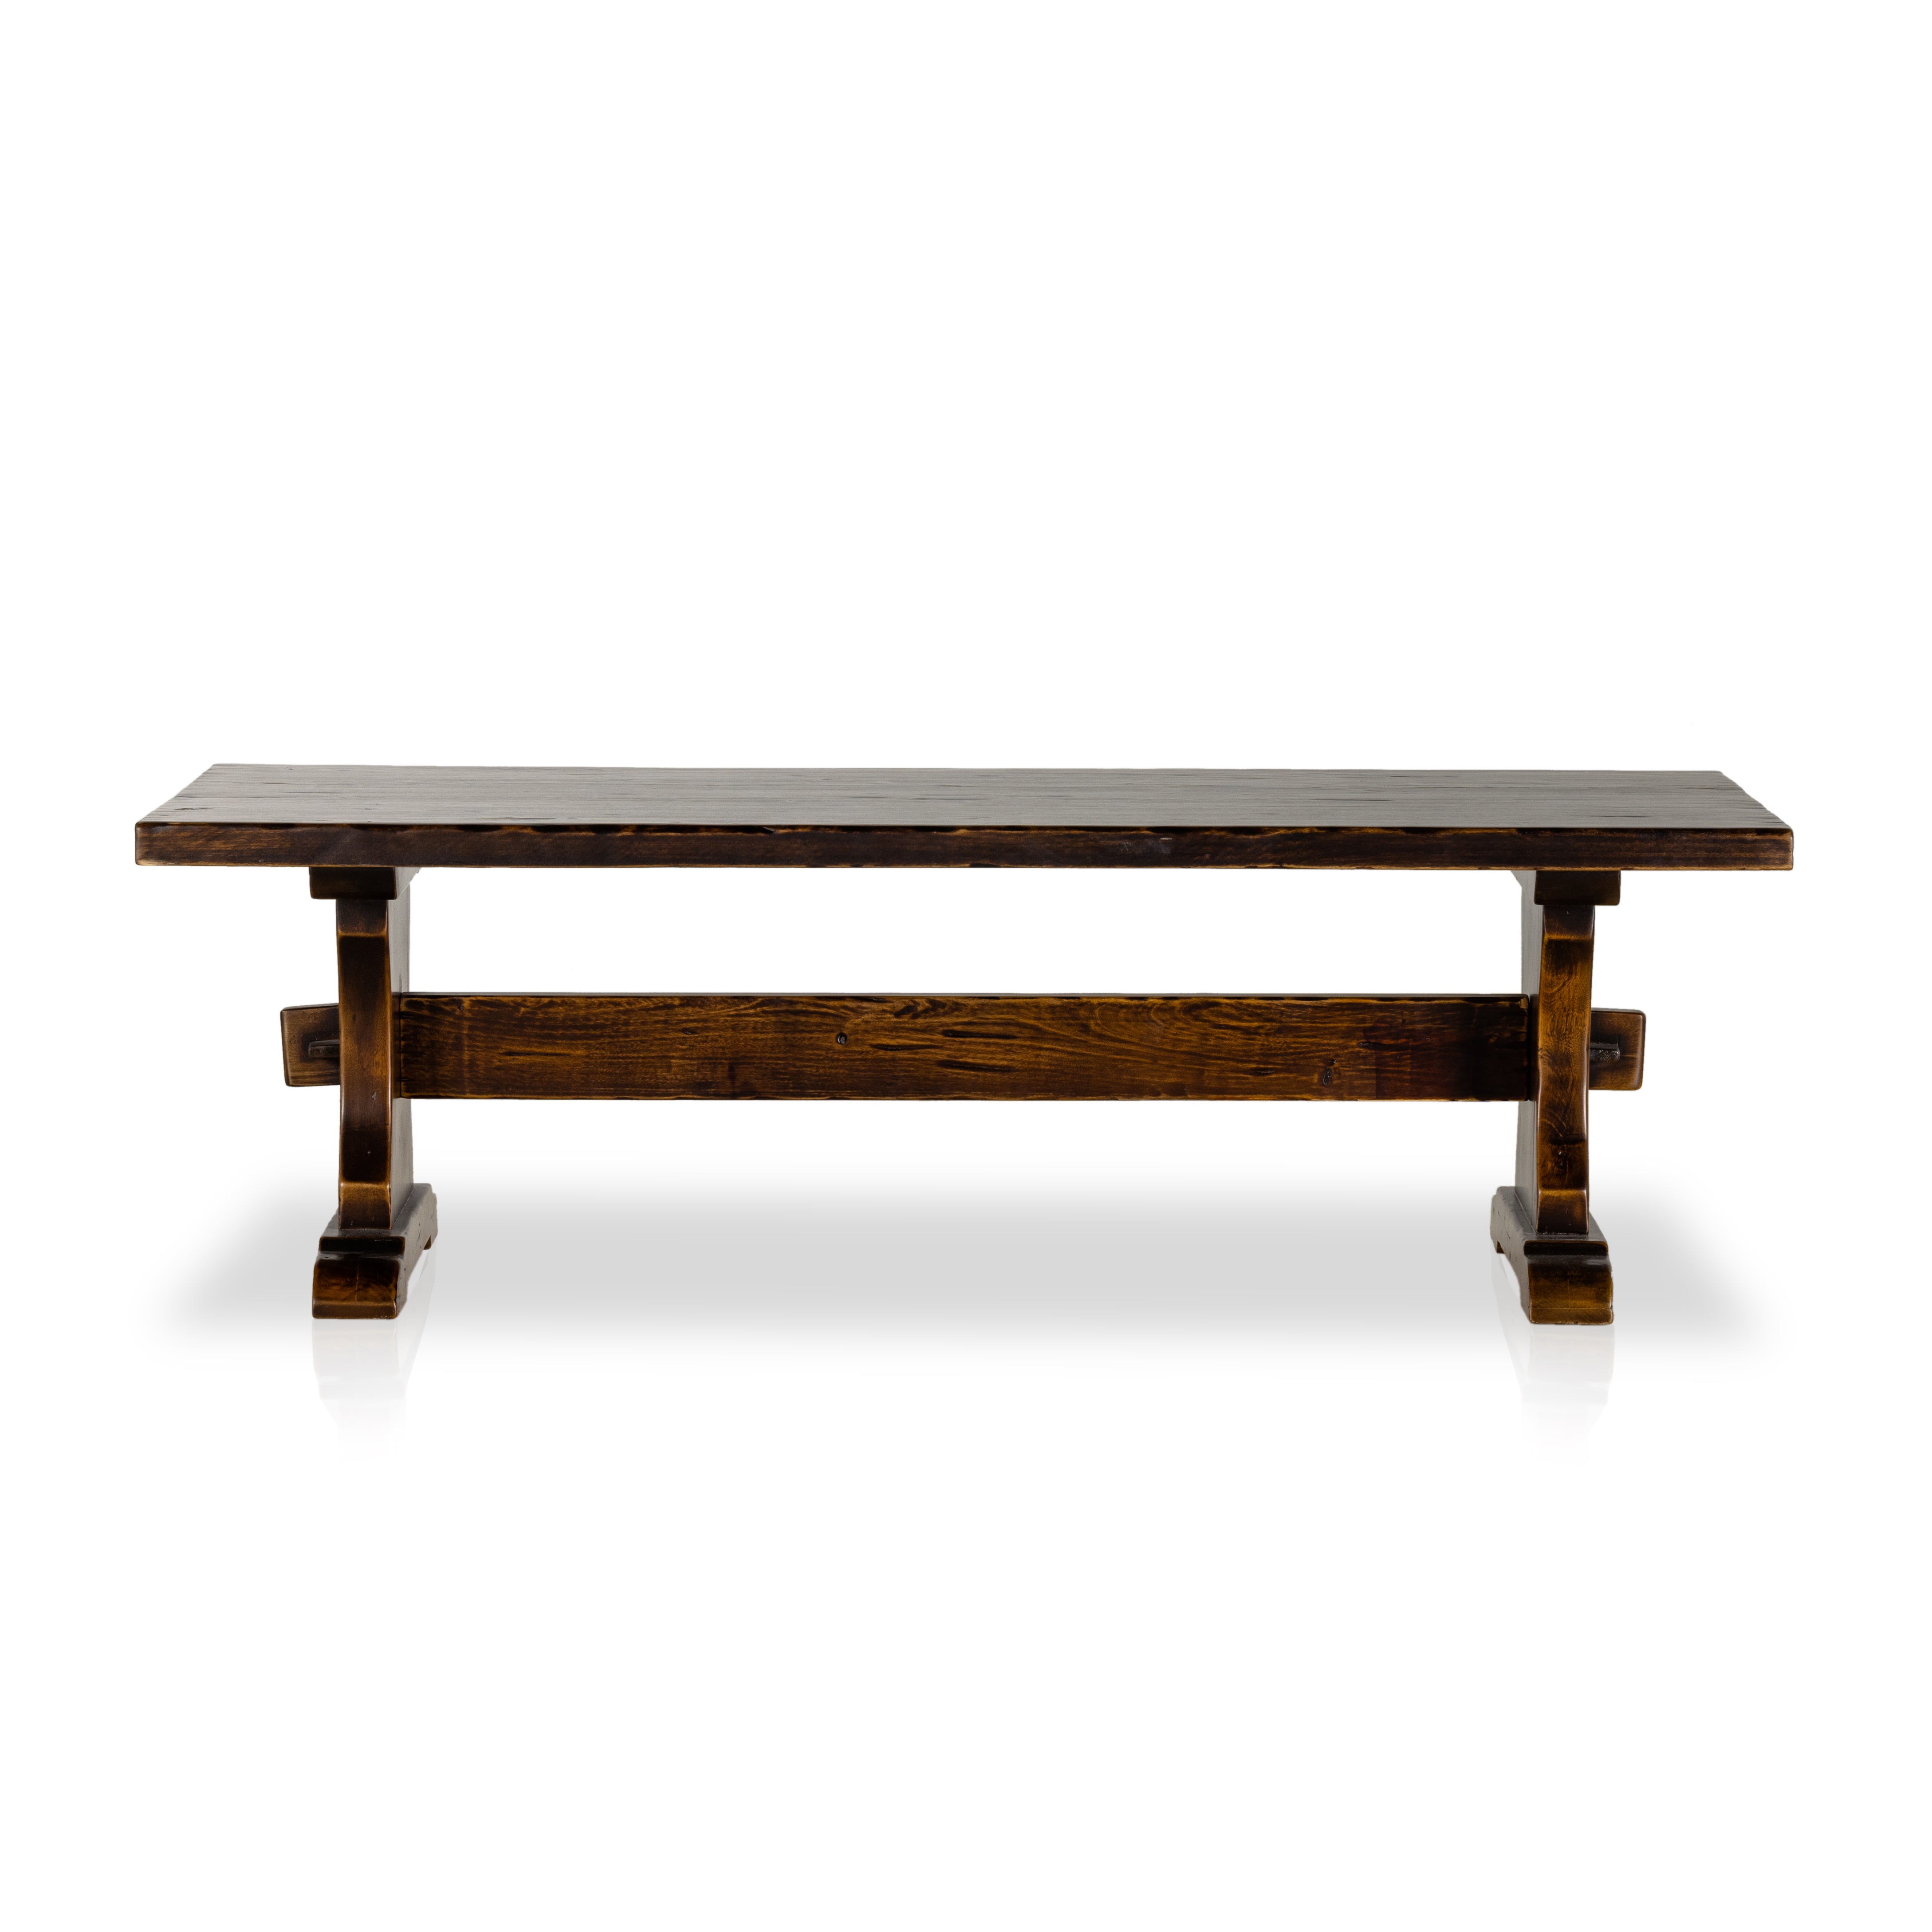 Invoke a timeless, rustic charm in your living space with the Trestle Coffee Table! This robust and weighty piece is finished in a distressed walnut, inspired by antique styling and designed to last. Make a statement today! Amethyst Home provides interior design, new construction, custom furniture and area rugs in the Miami metro area